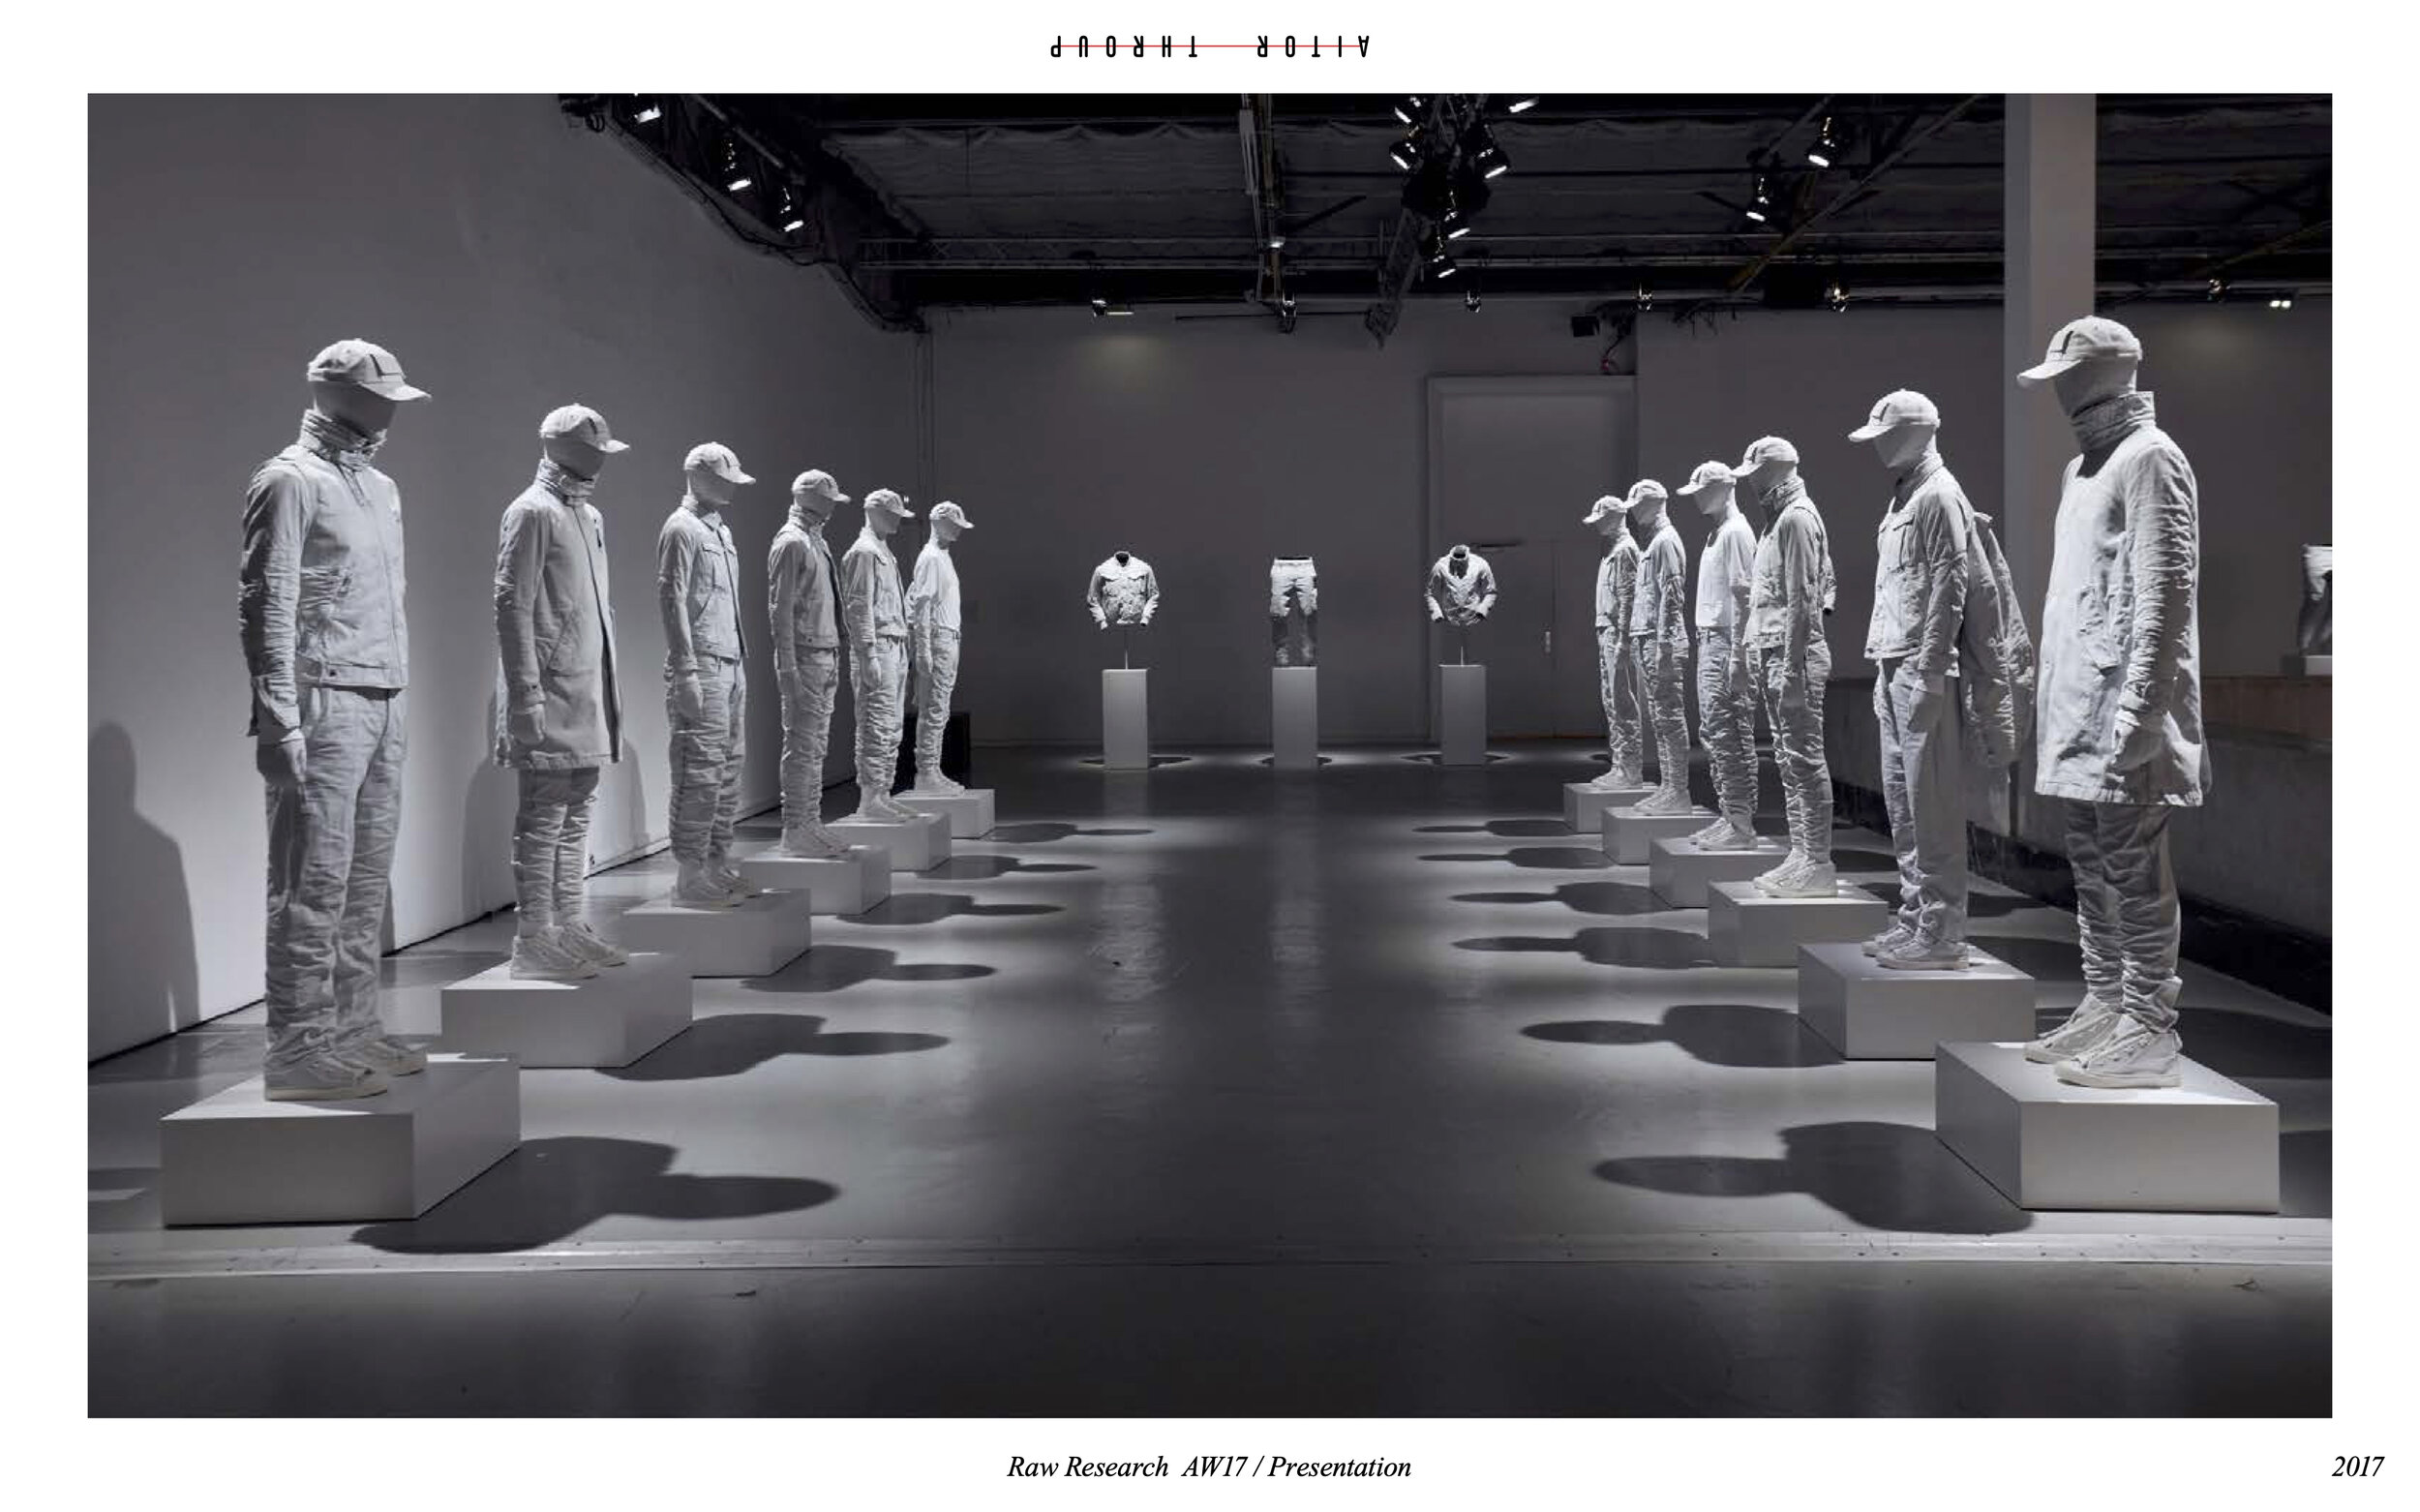 aitor throup selected images for a:t 15.jpg